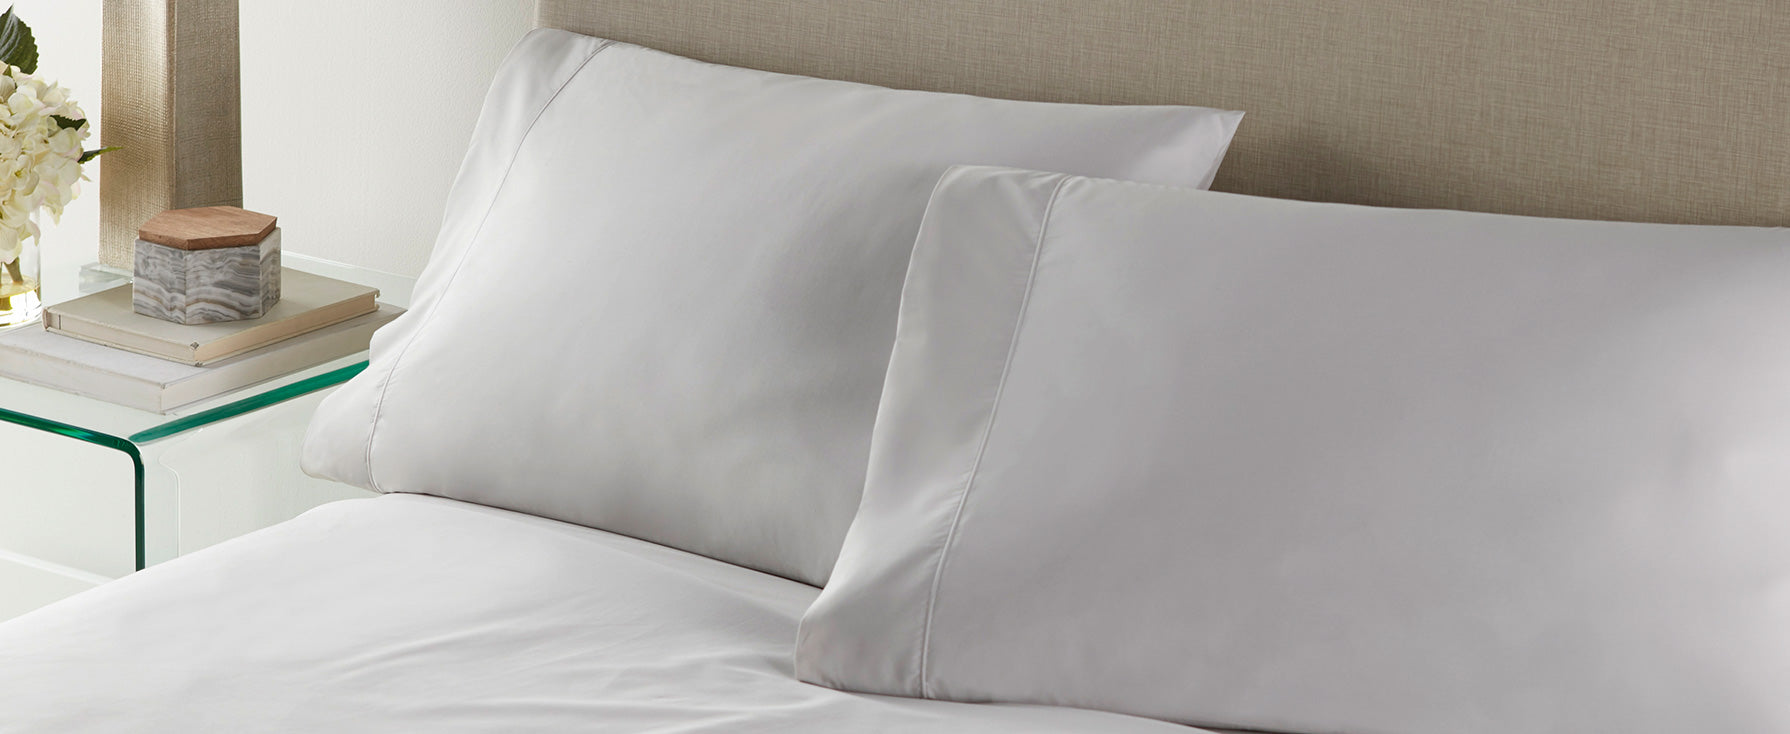 
Nile egyptian cotton sheets and pillowcases on bed
